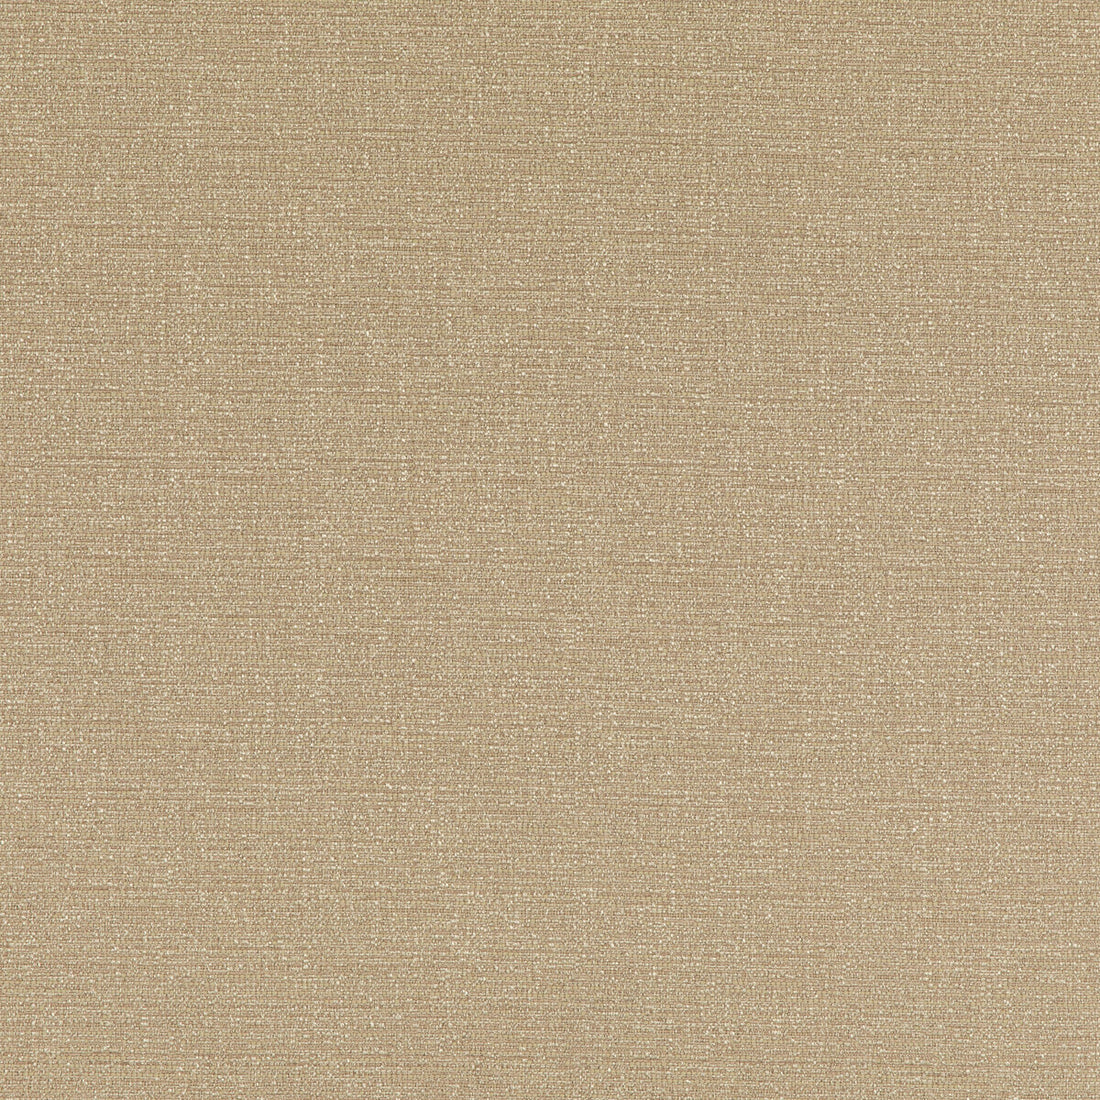 Bara fabric in linen color - pattern ED85324.110.0 - by Threads in the Luxury Weaves II collection